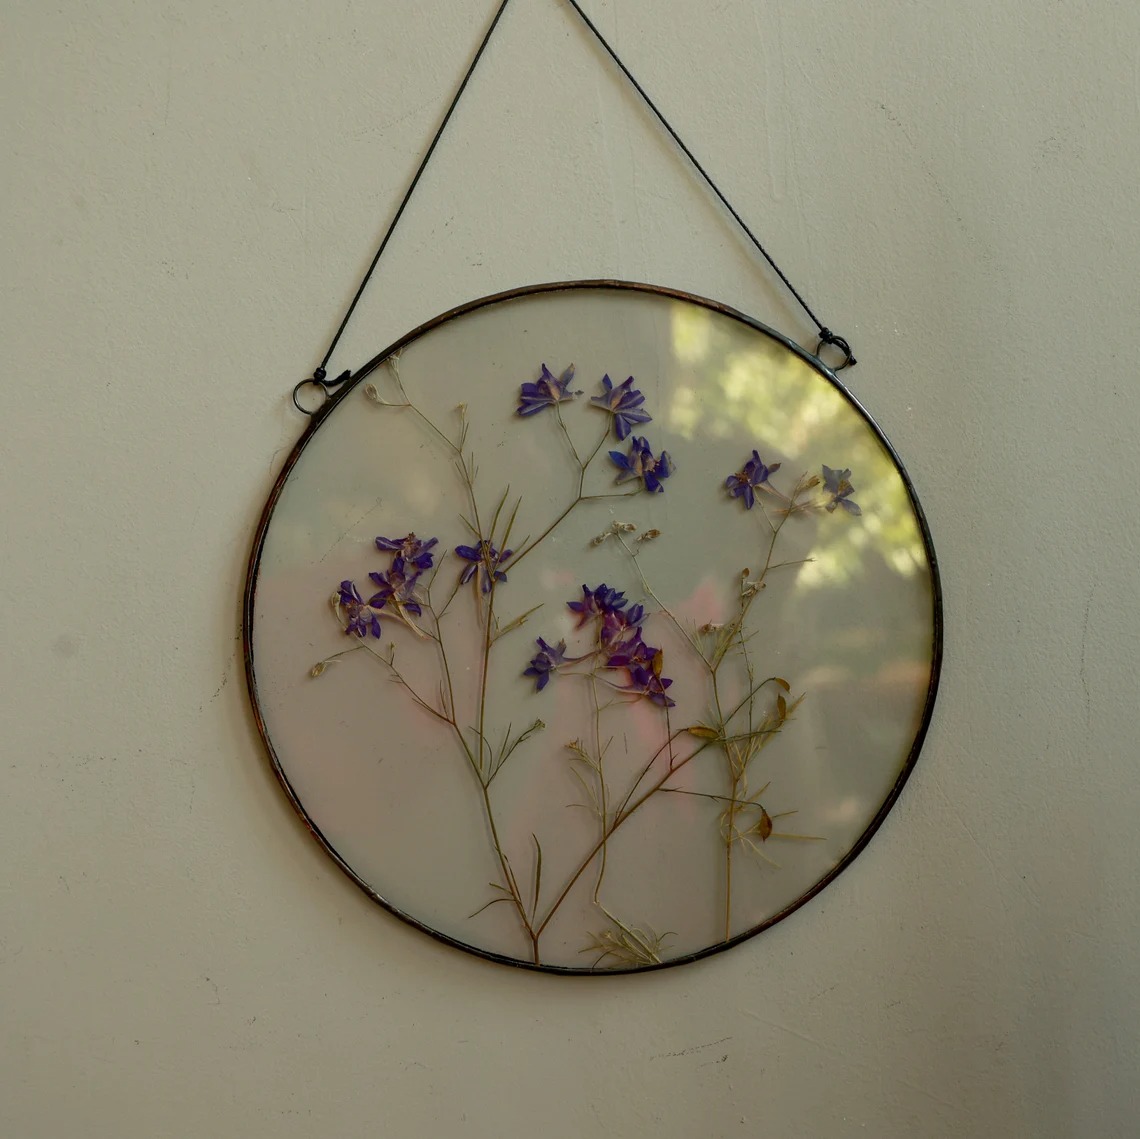 Gorgeous Herbarium In Glass And Resin Sea Frames By Anna Paschenko (9)